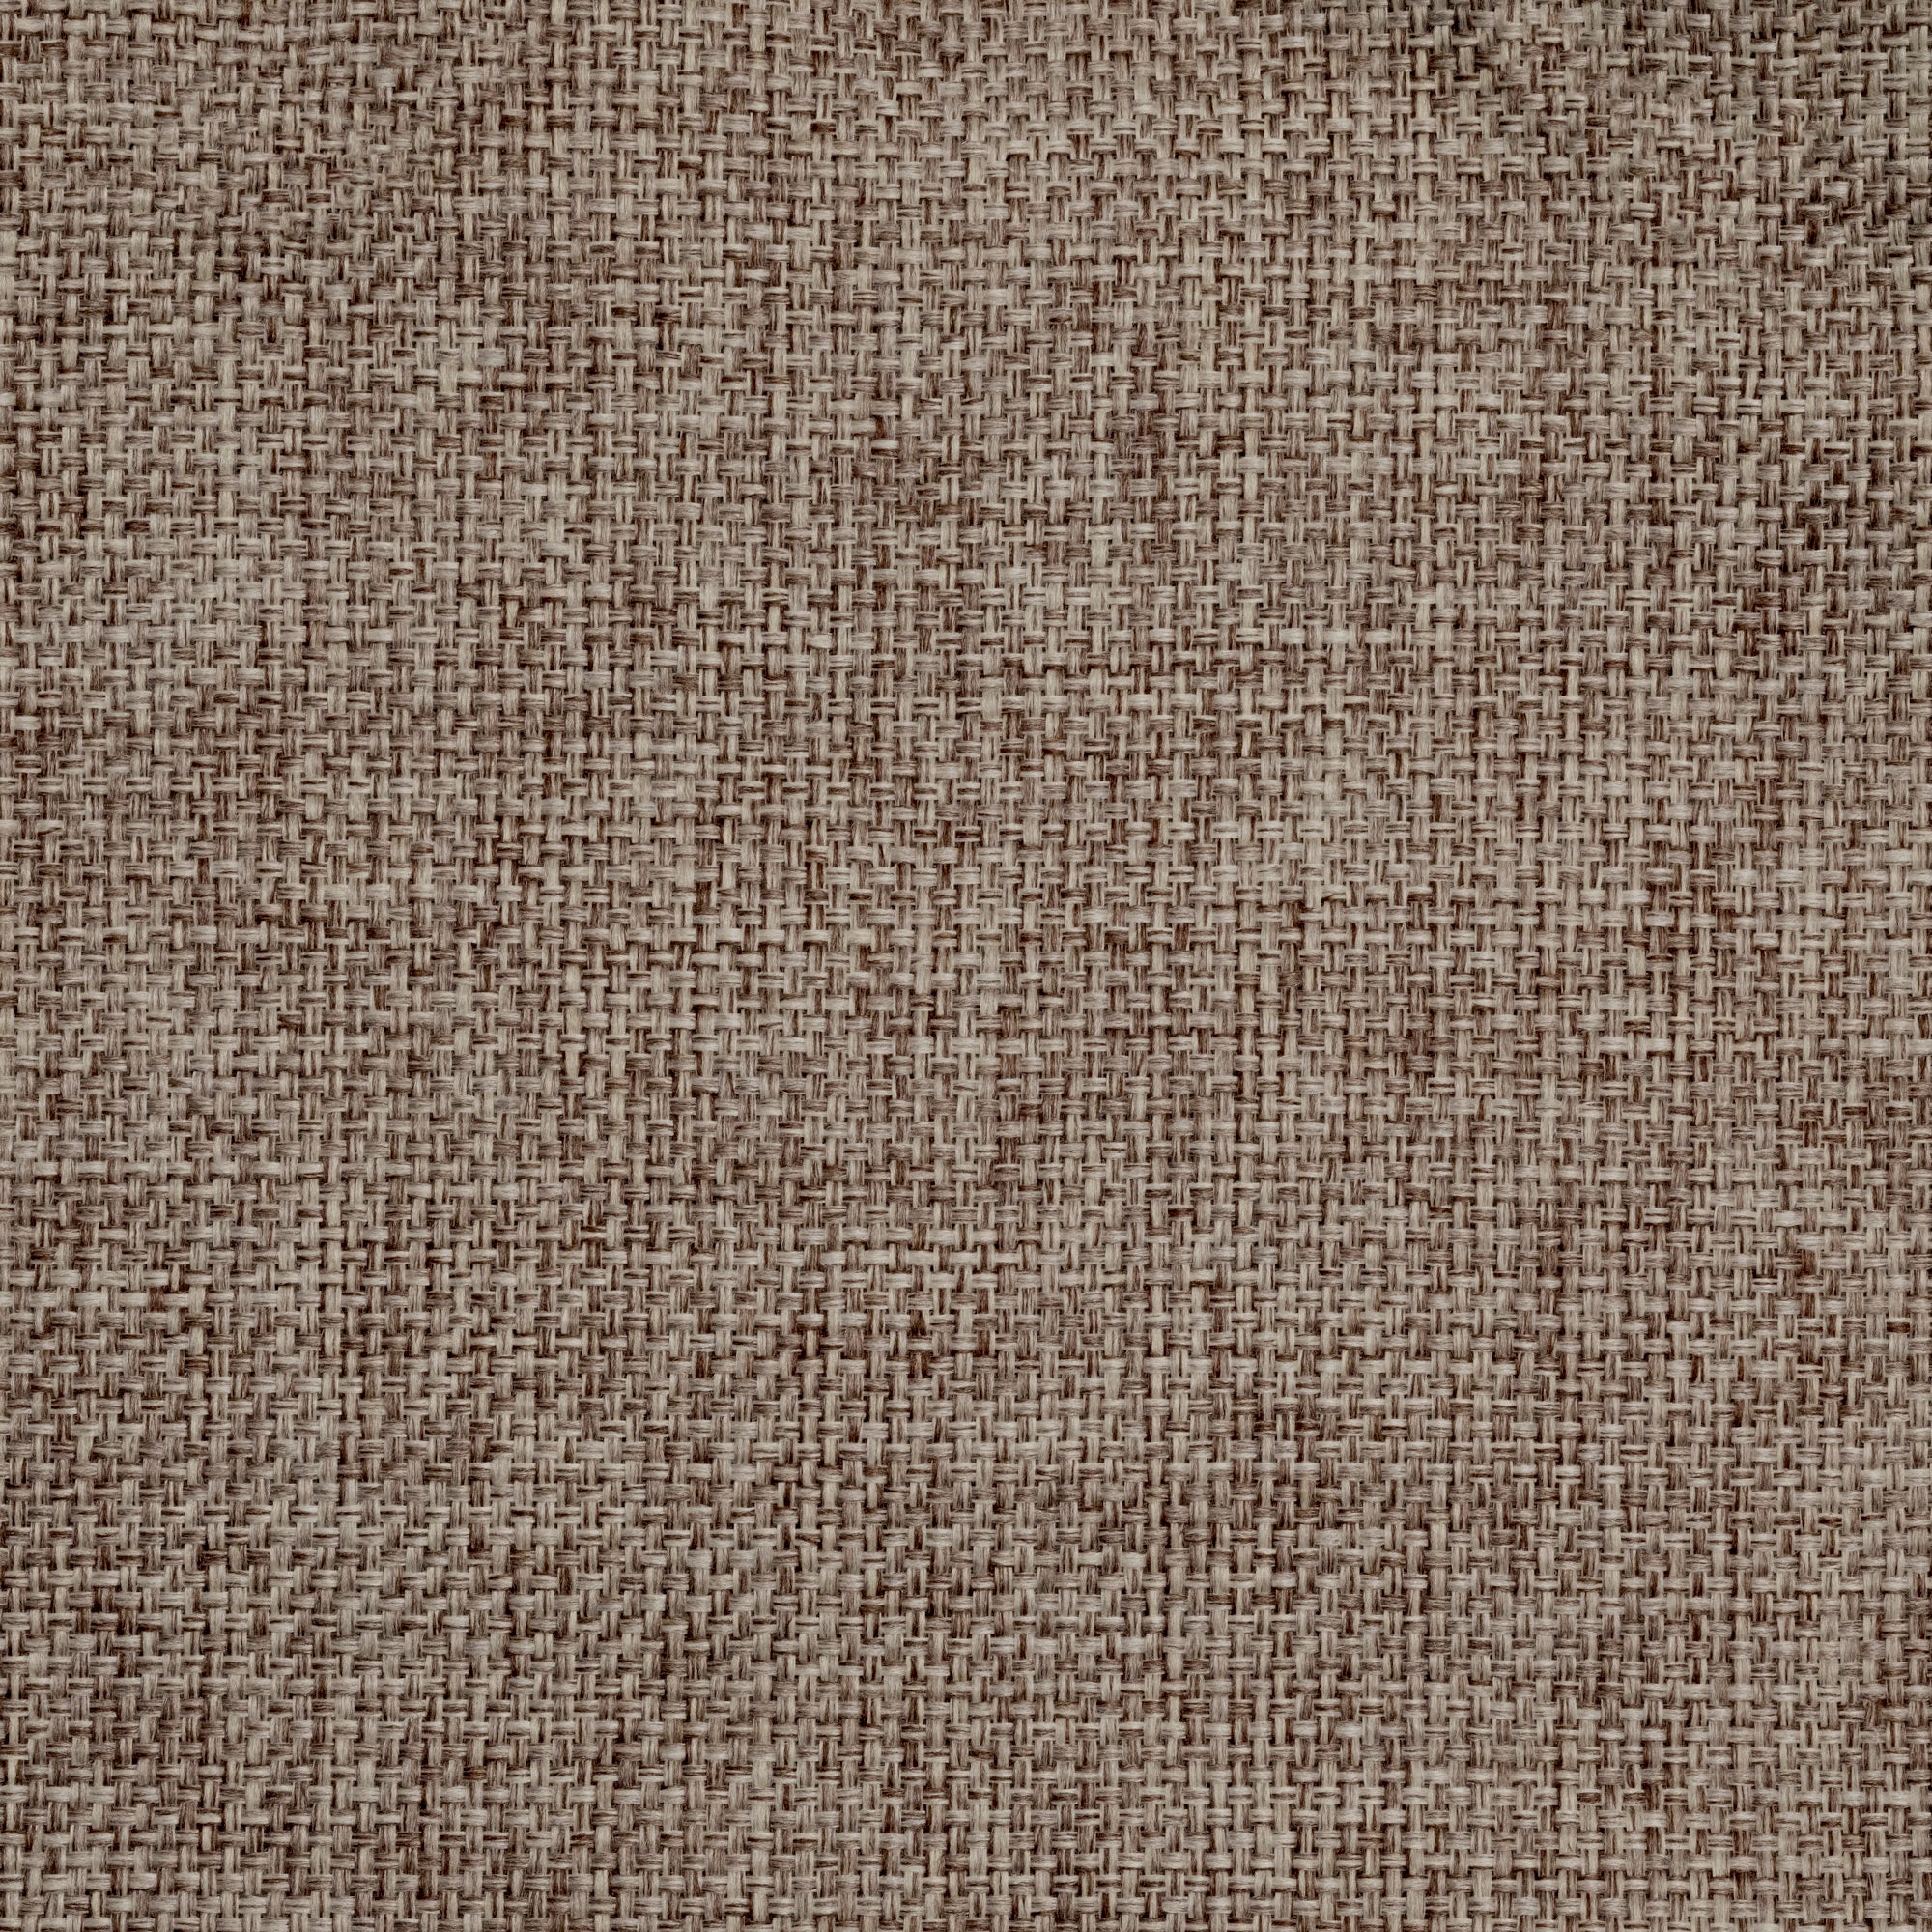 Wicker Beige and Neutral Texture Upholstery Fabric by The Yard